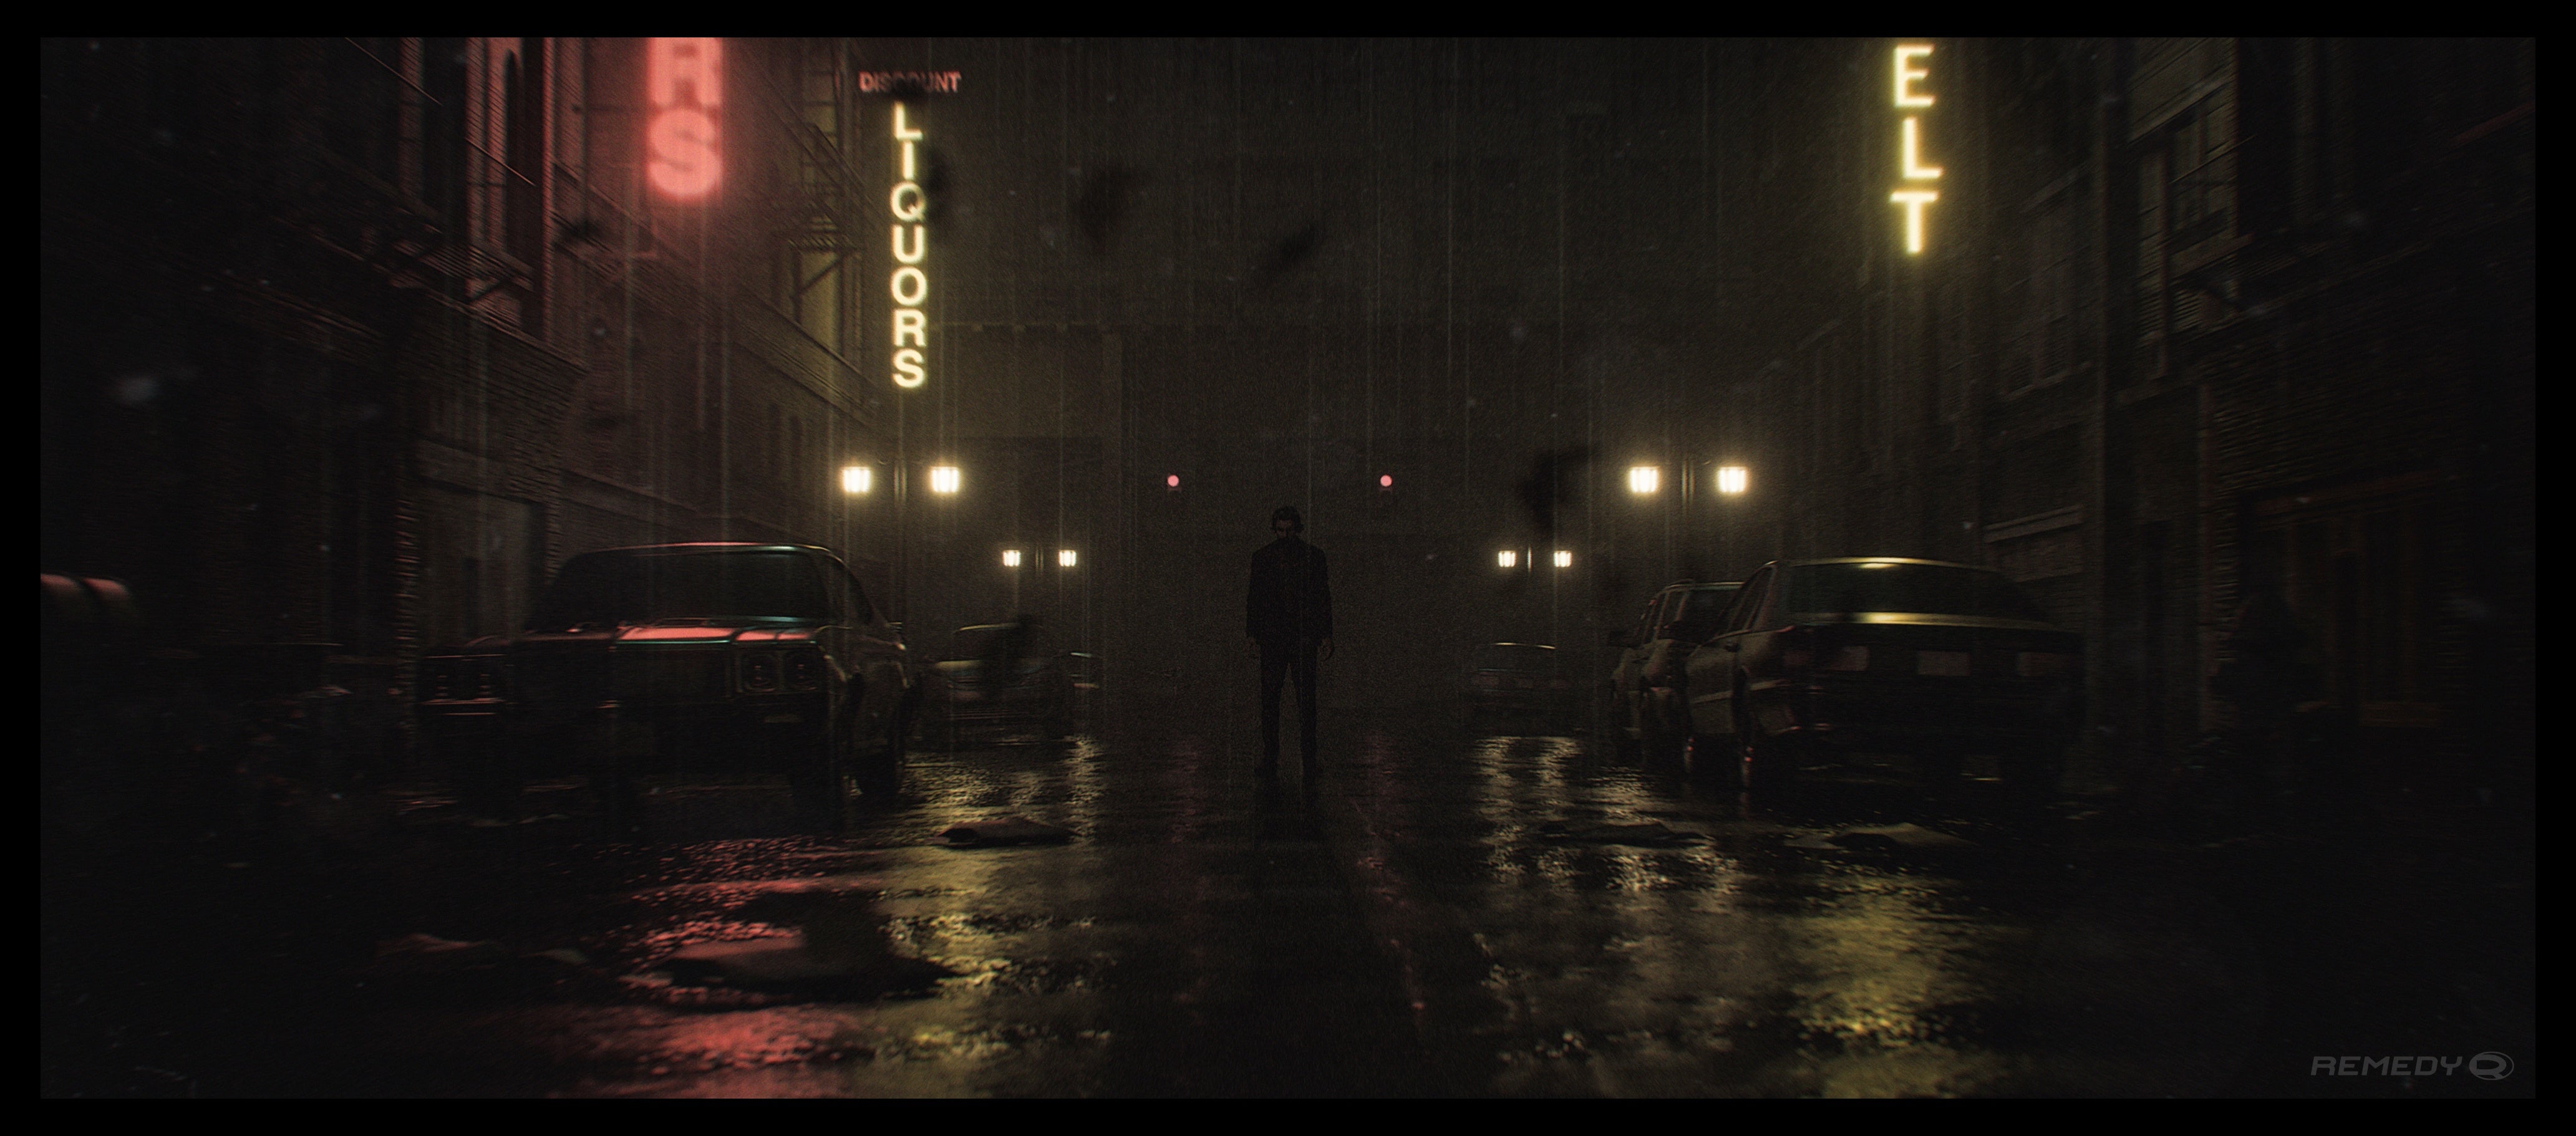 Alan Wake 2 concept art showing Alan standing at night in a wet city street, lit by neon liquor signs.